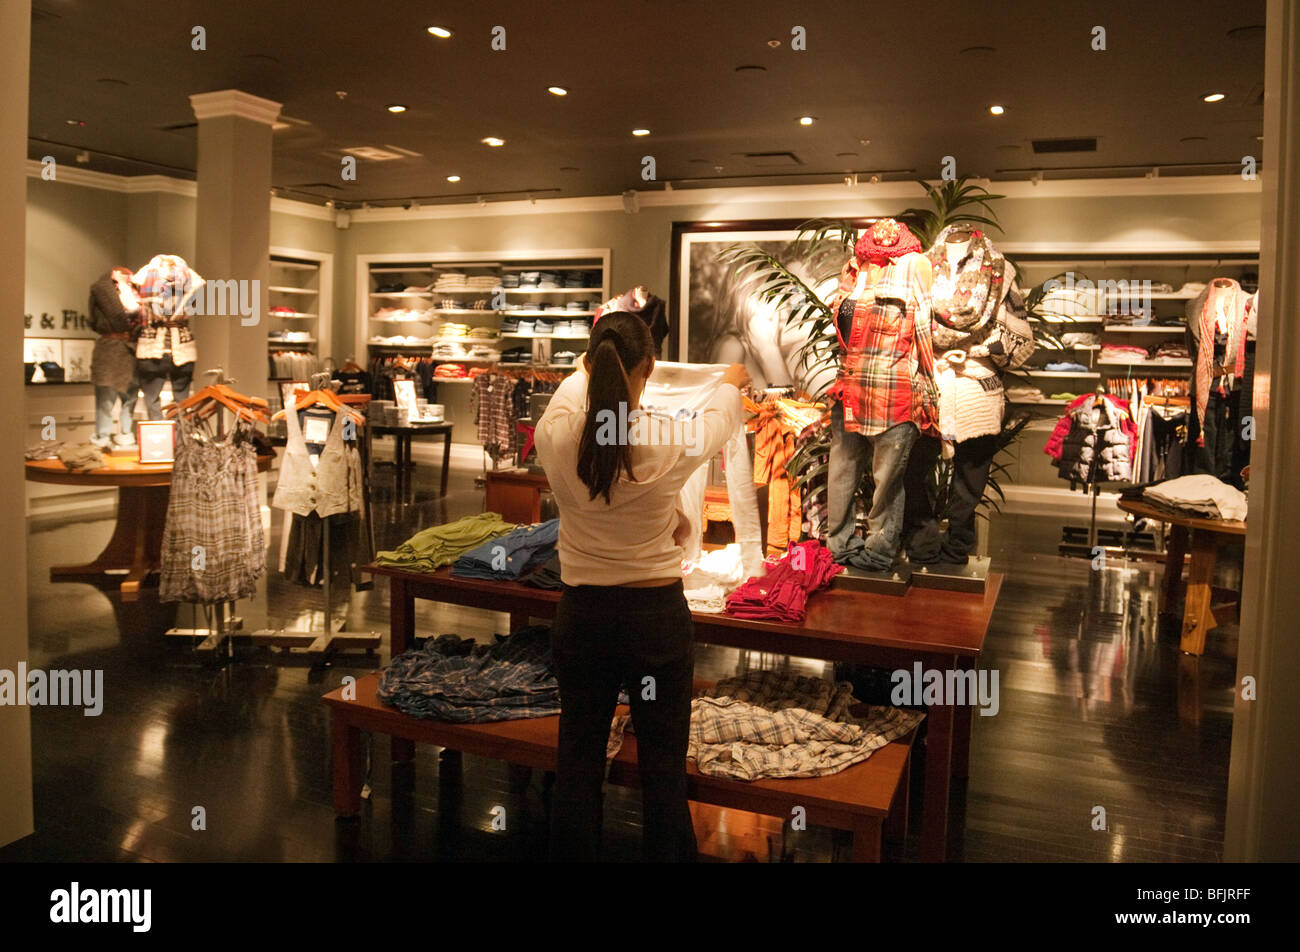 Abercrombie And Fitch High Resolution Stock Photography and Images - Alamy